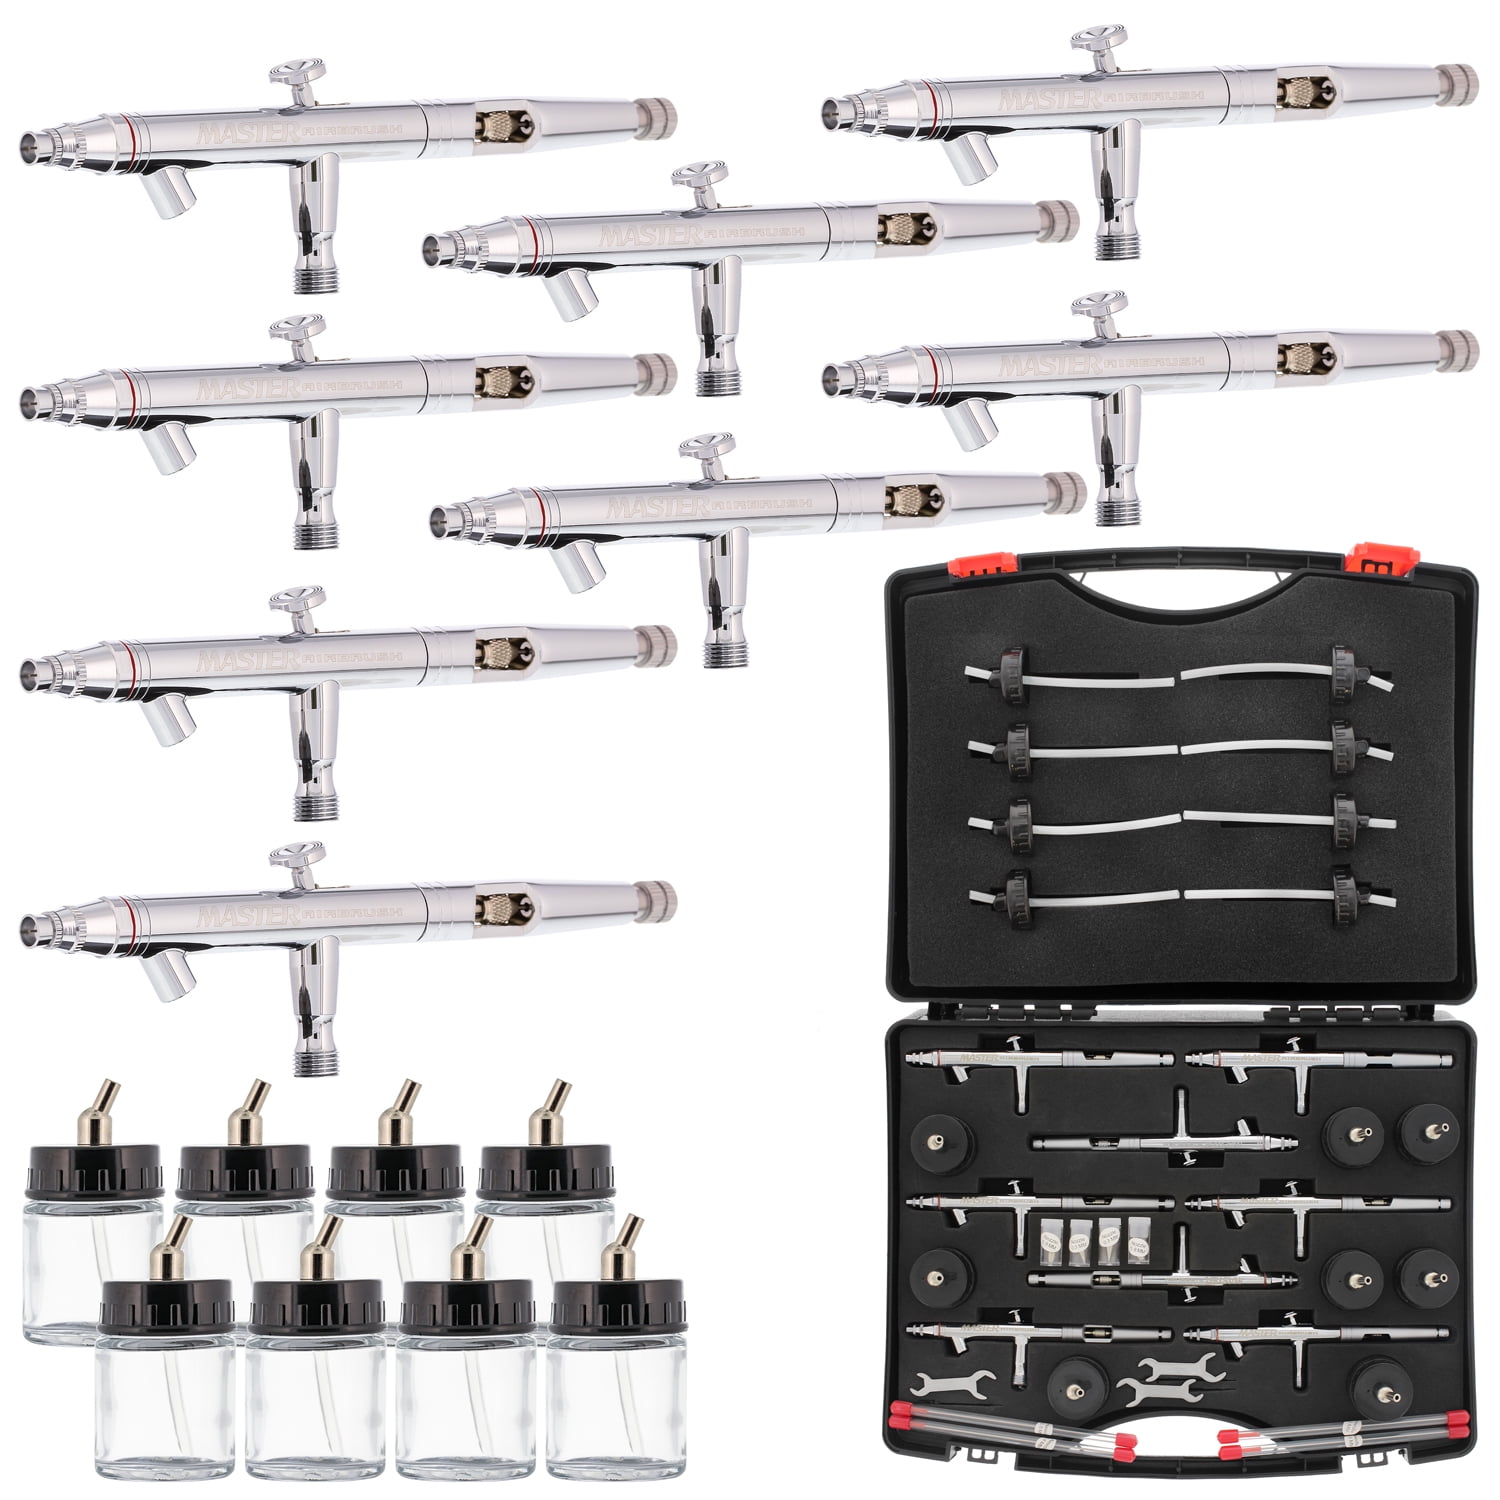 Master Airbrush Airbrushing System Kit with a G23 Multi-Purpose Gravity  Feed Dual-Action Airbrush with 1/3oz. Cup and 0.3mm Tip, Mini Air  Compressor